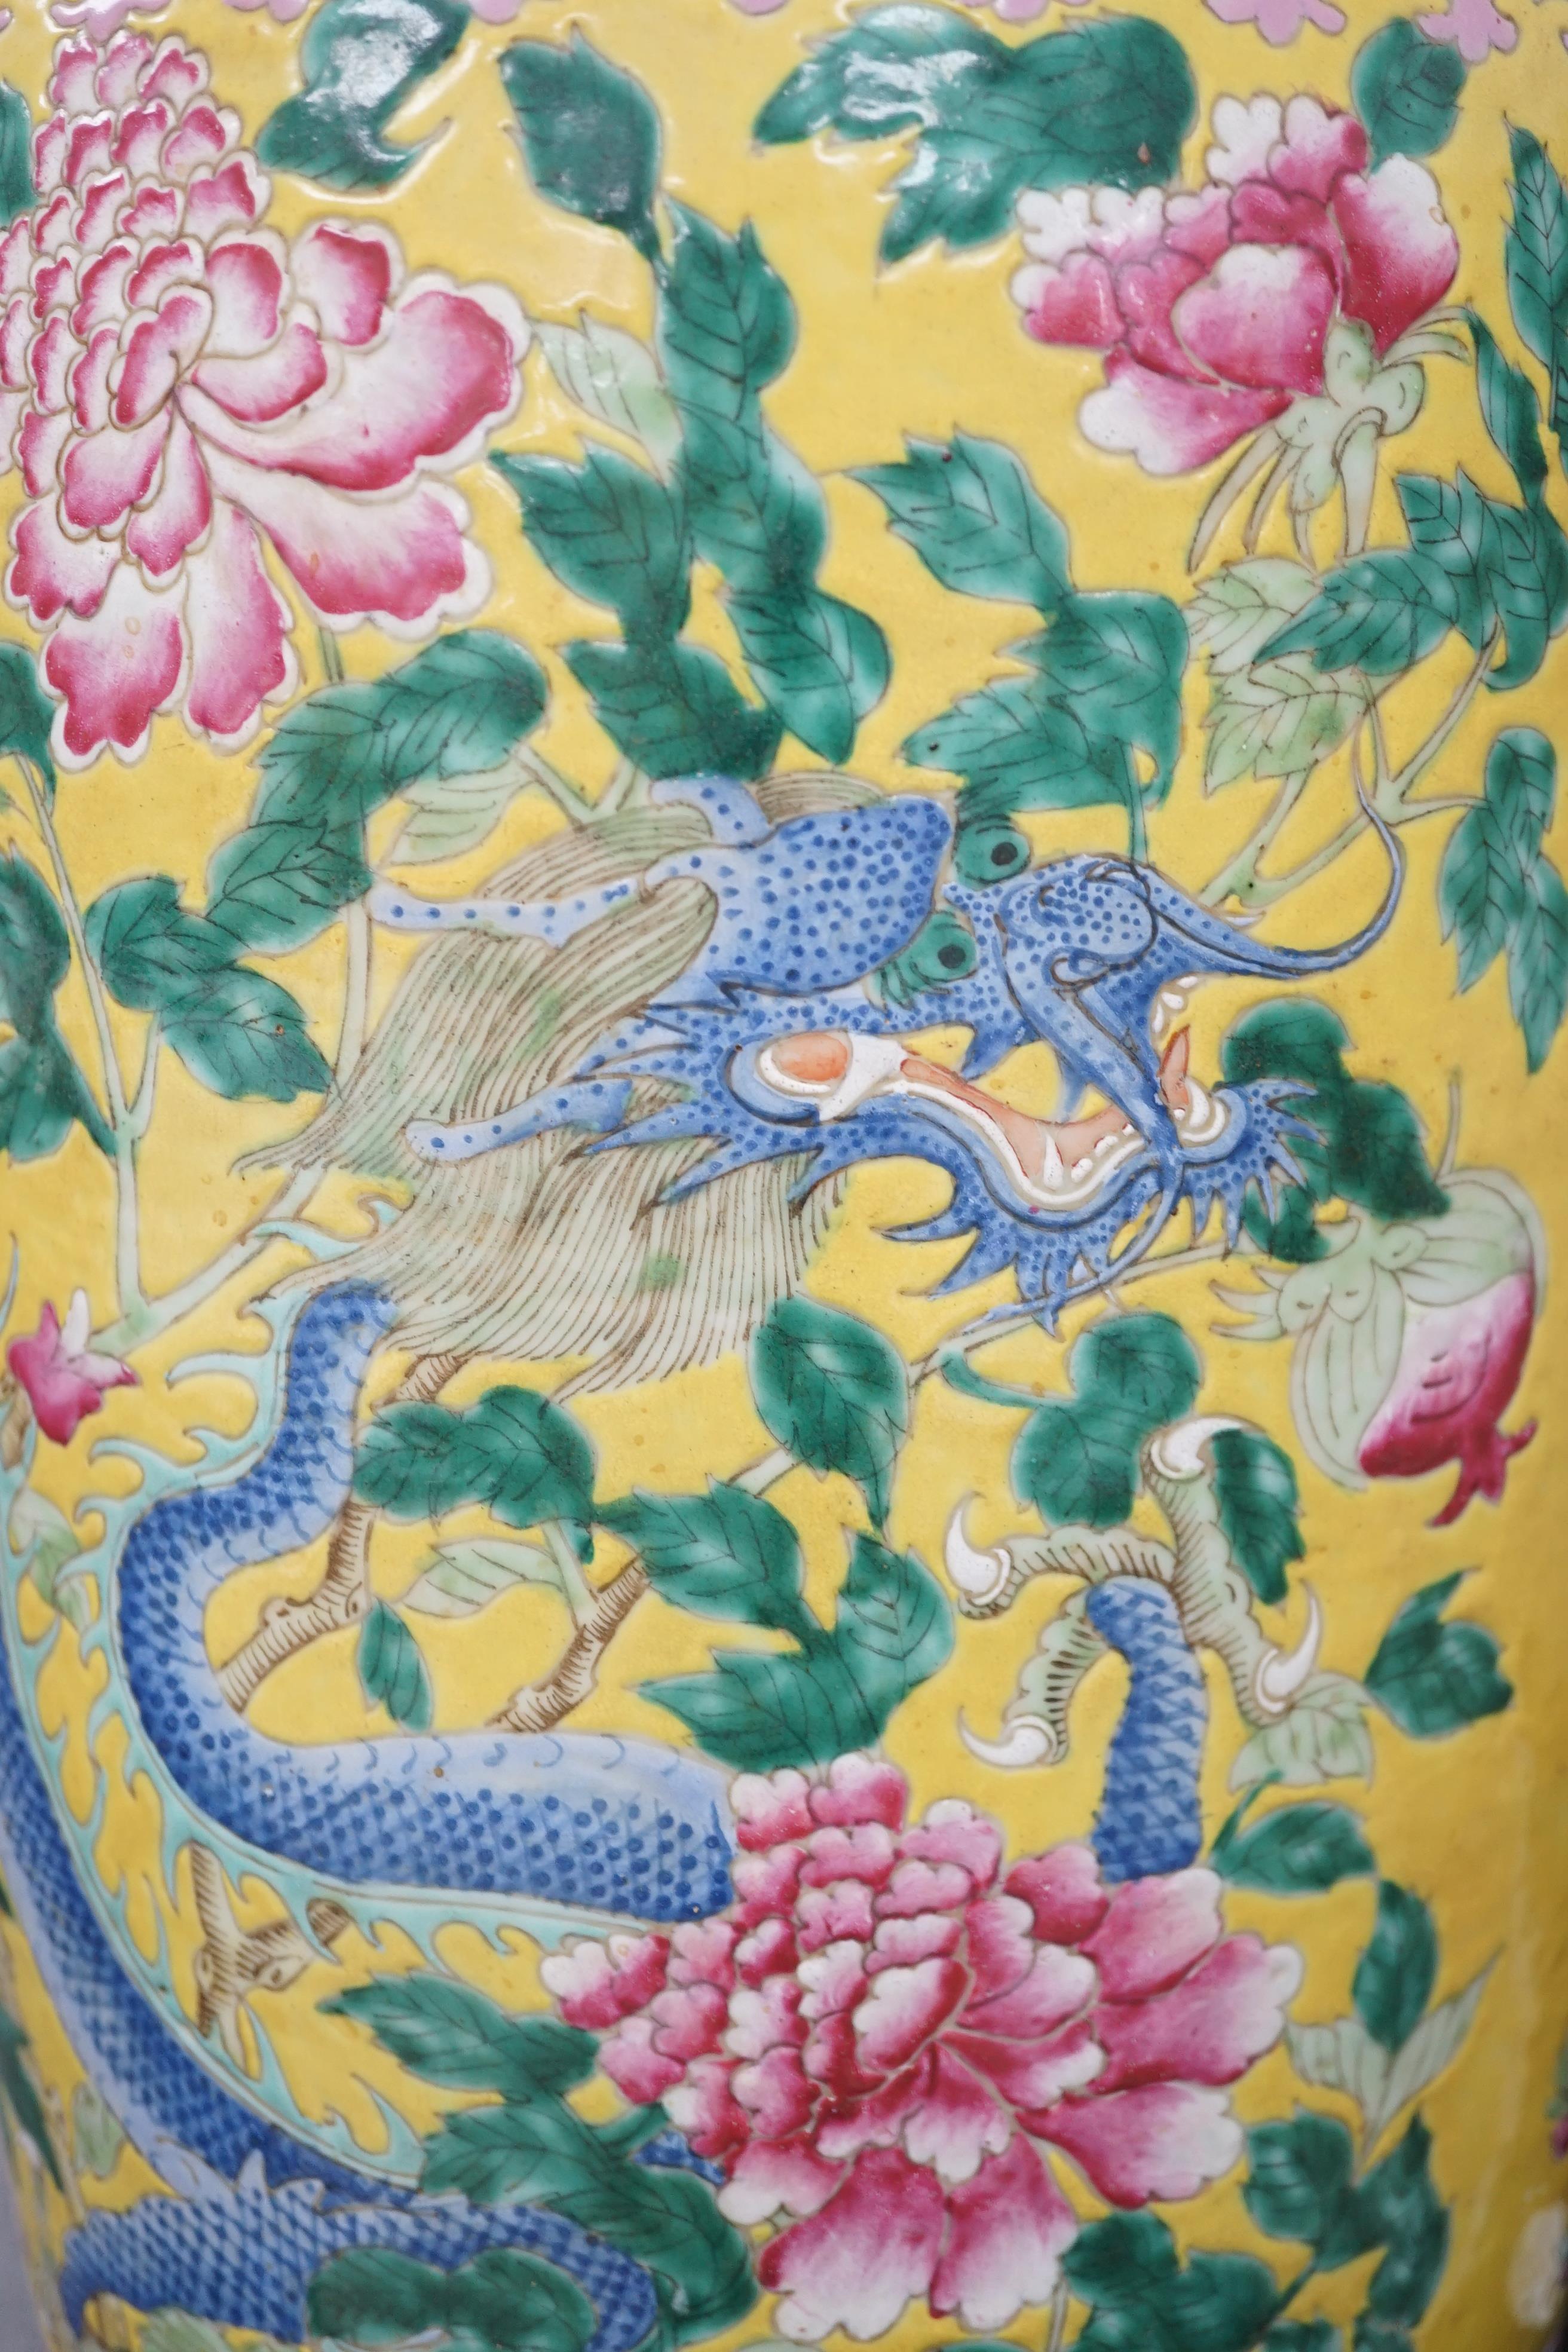 A tall Chinese Straits yellow ground ‘dragon’ vase, 19th century, rim chips